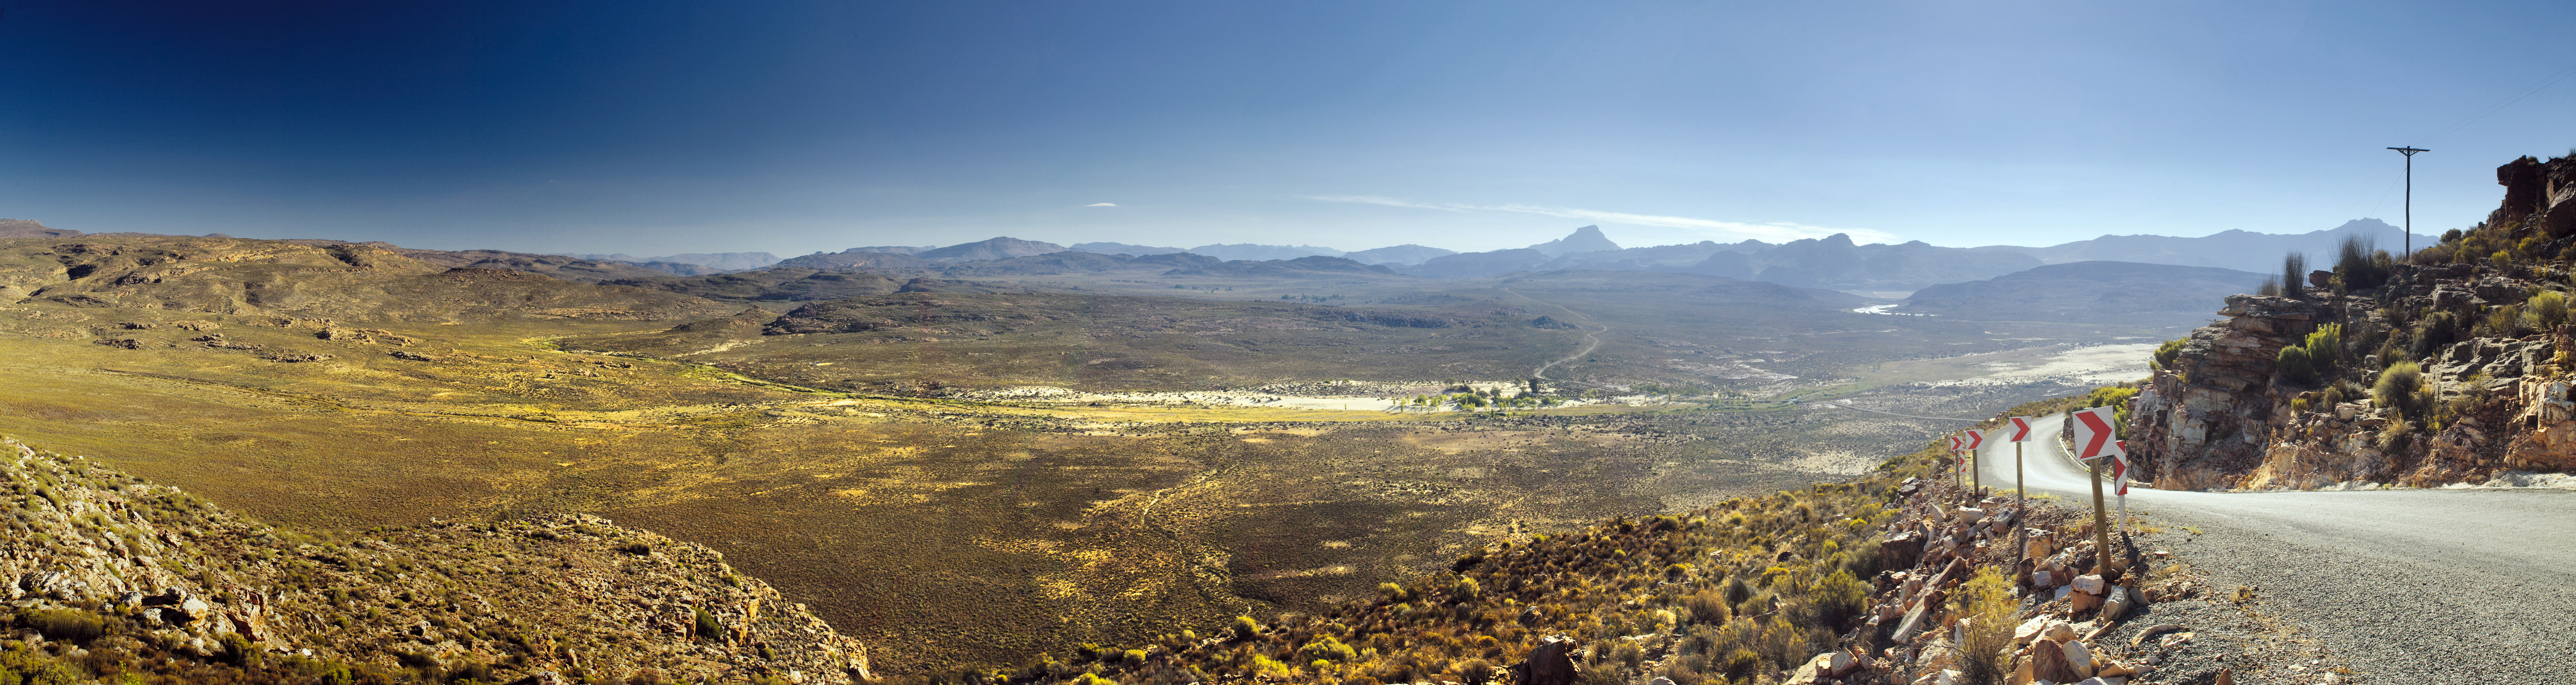 SOUTH AFRICA - May 2011: From the Katbakkies Pass, you can see Tafelberg on the left and Sneeukop on the right. Feature text available. (Photo by Gallo Images/GO!/Denver Hendricks)